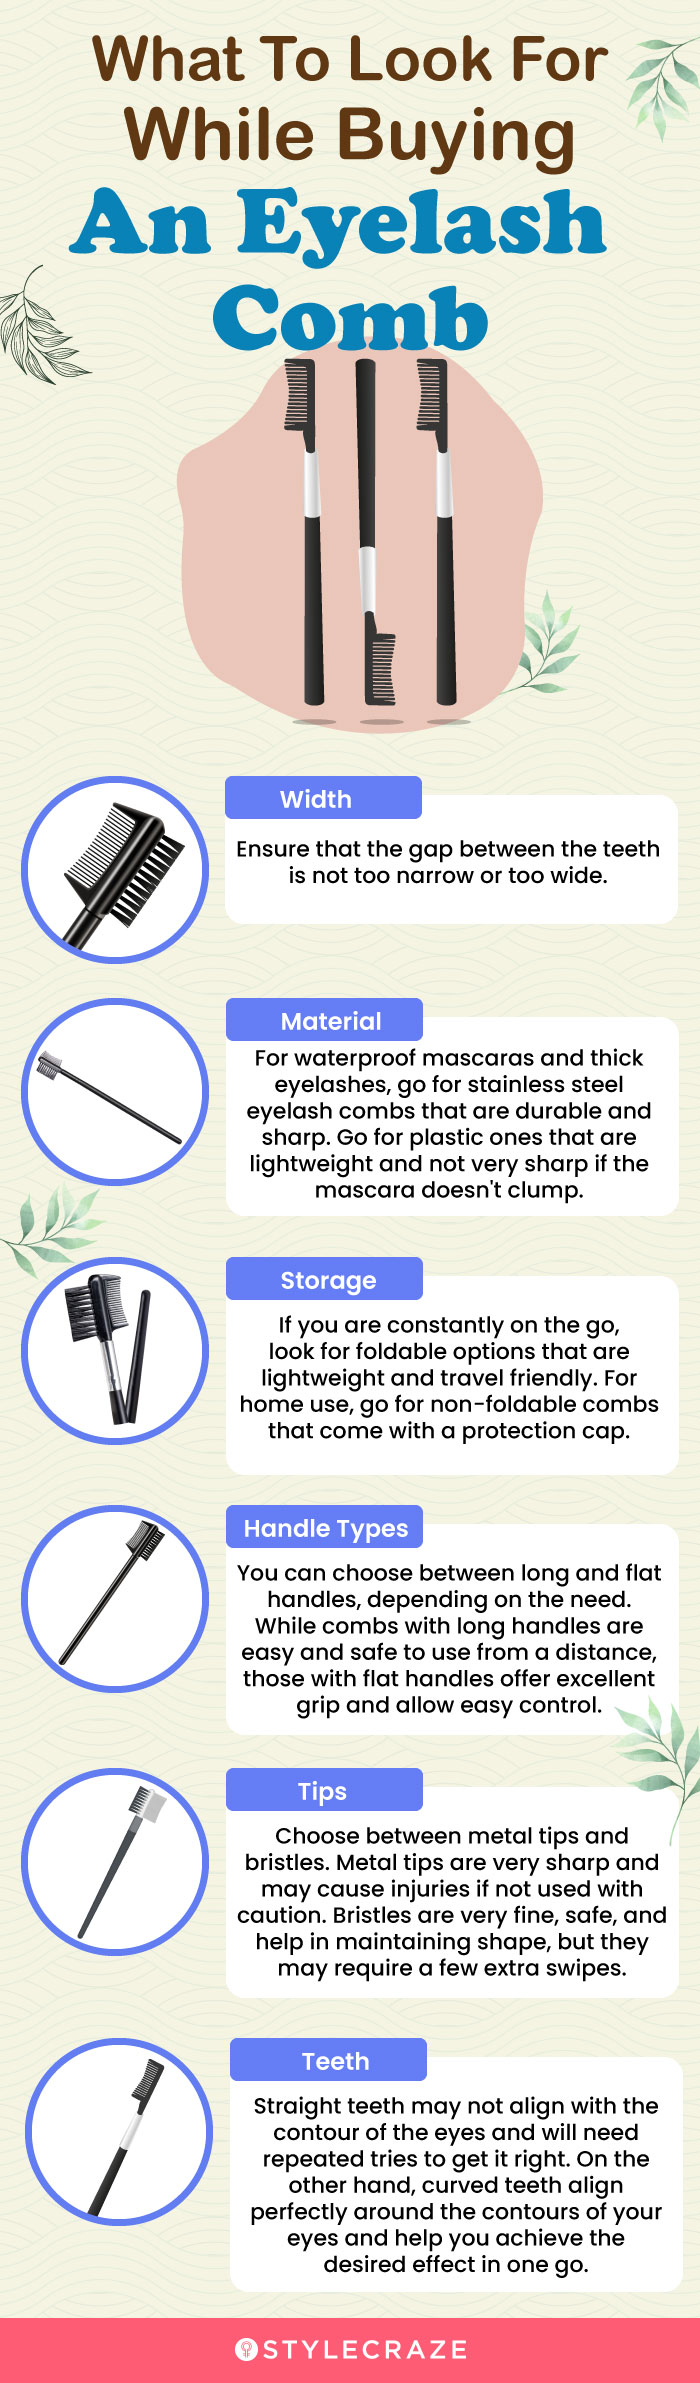 What To Look For While Buying An Eyelash Comb (infographic)